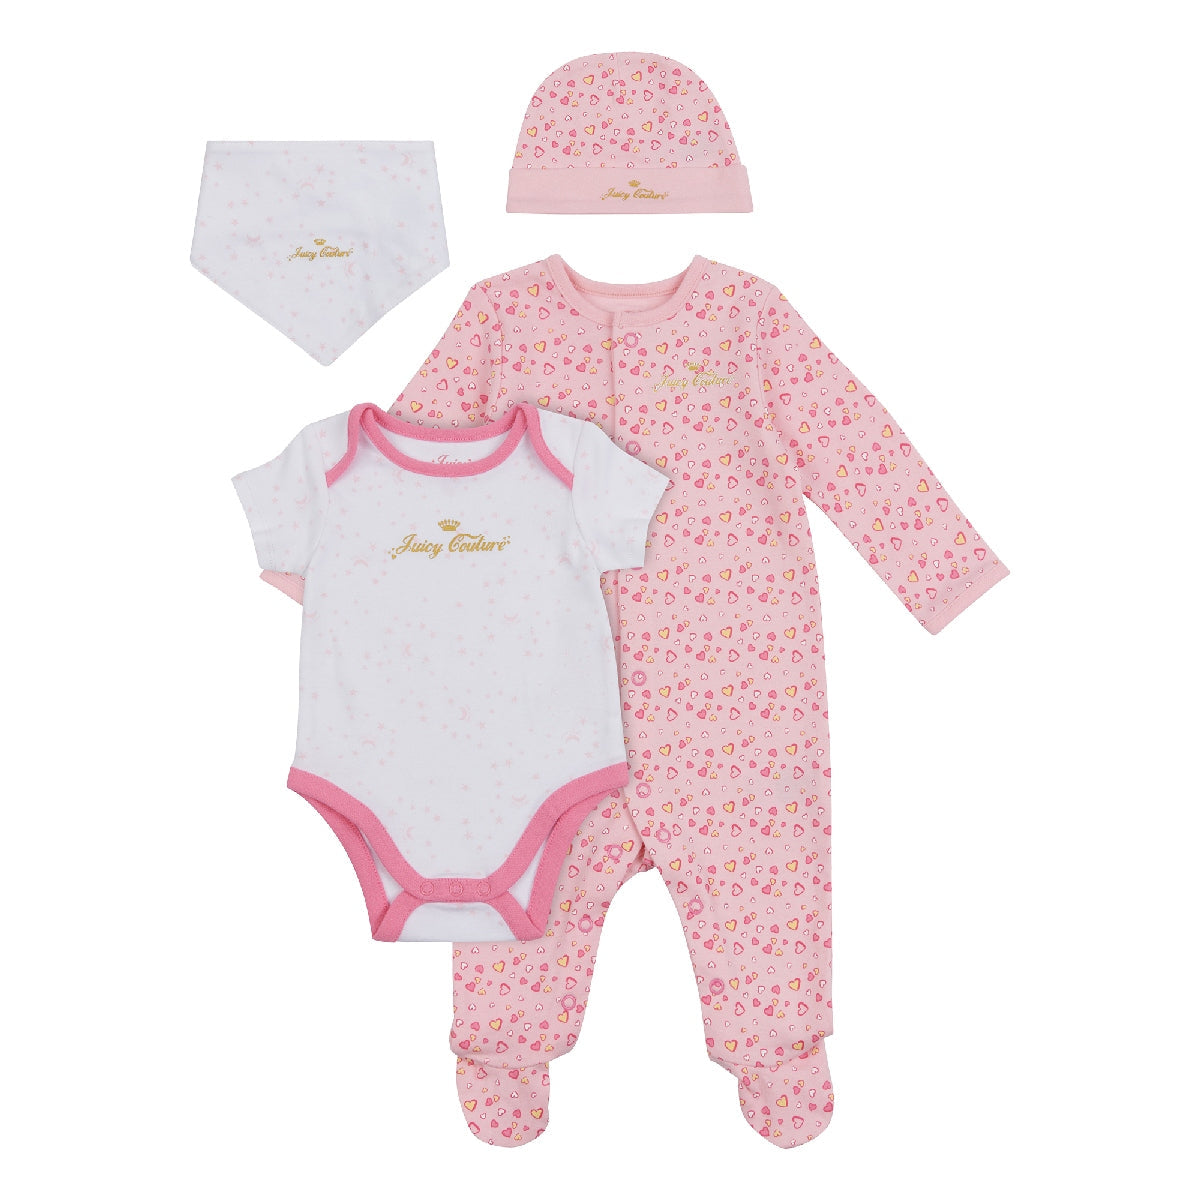 Juicy Couture Girls Toddler 4 Piece Gift Set